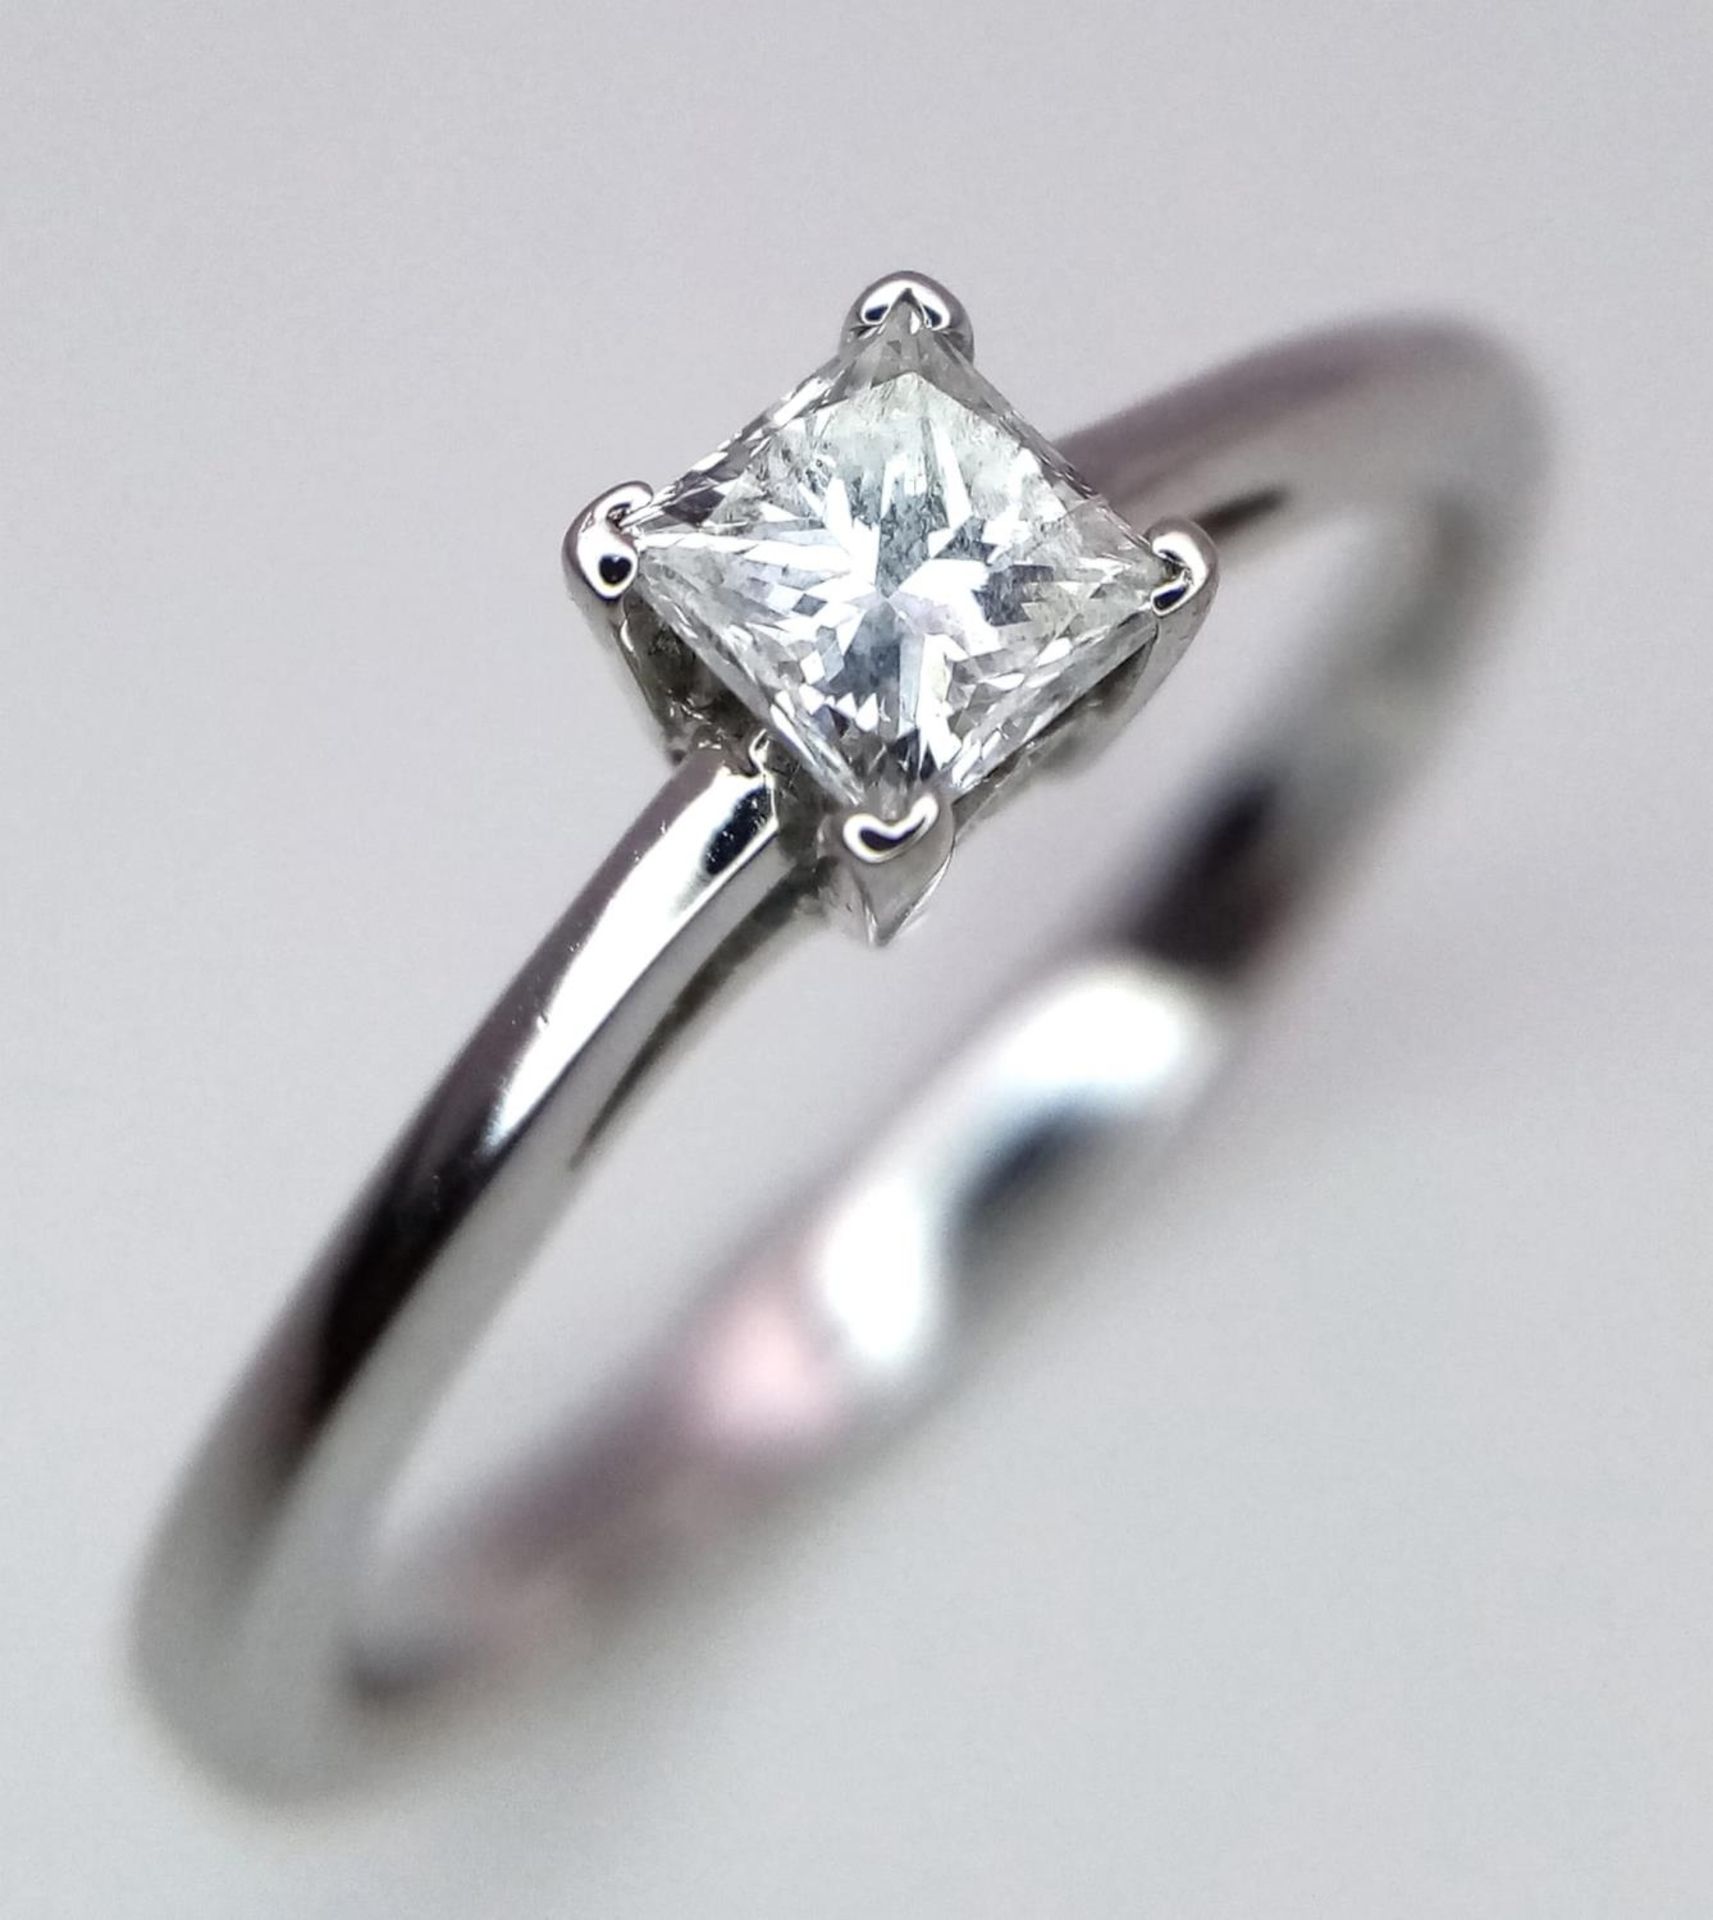 AN 18K WHITE GOLD PRINCESS CUT DIAMOND SOLITAIRE RING - 0.40CT APPROX. 3.1G. SIZE P - Image 2 of 4